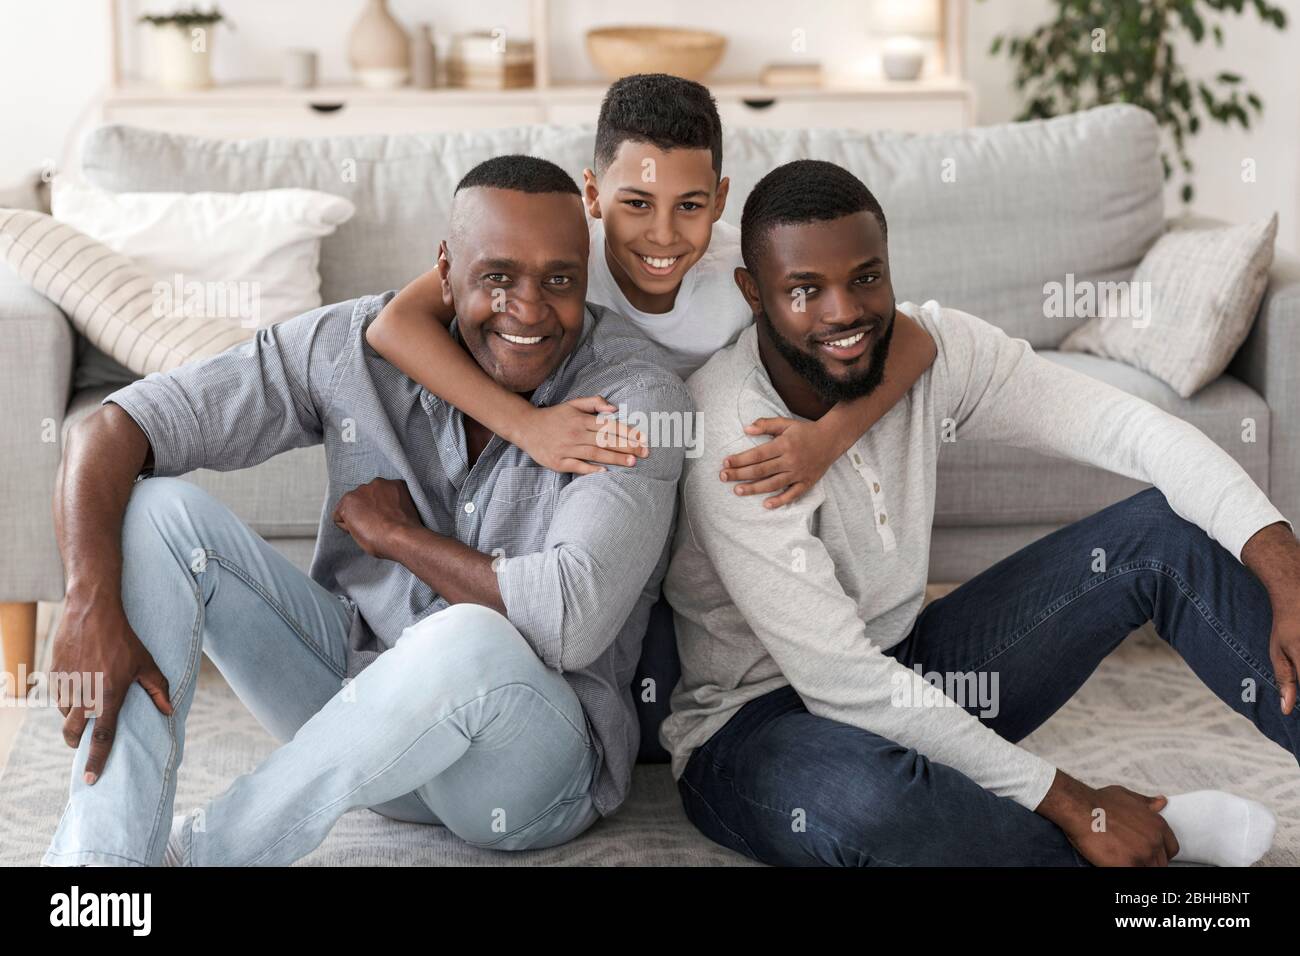 Portrait of happy black multi generation family at home Stock Photo